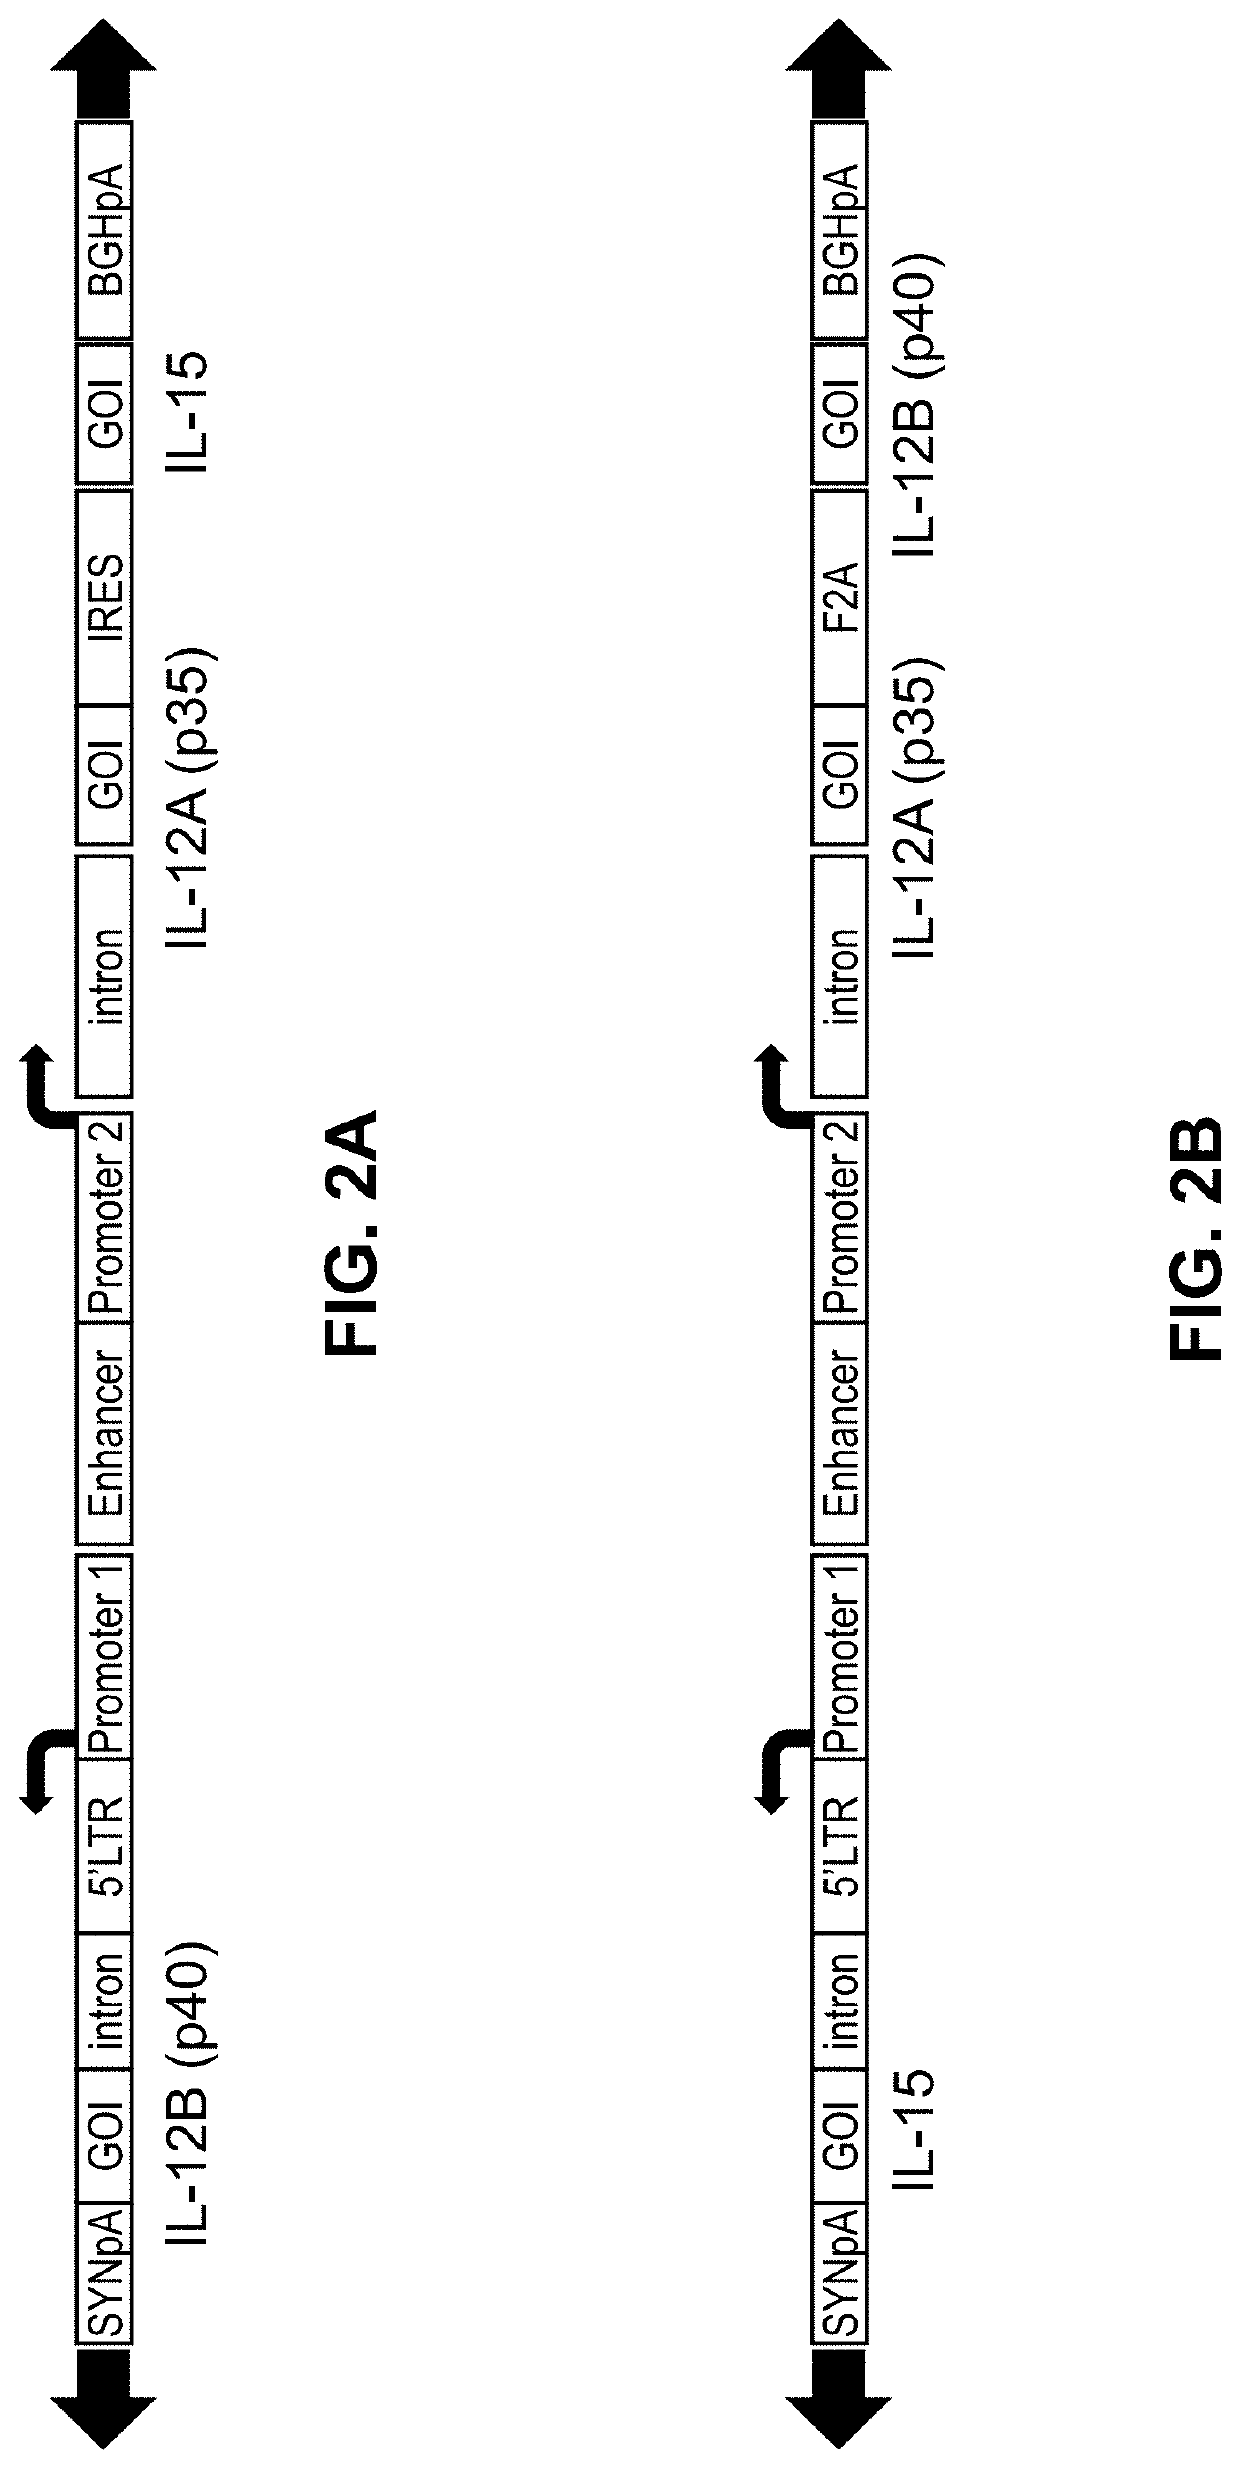 Viral vector constructs for delivery of nucleic acids encoding cytokines and uses thereof for treating cancer